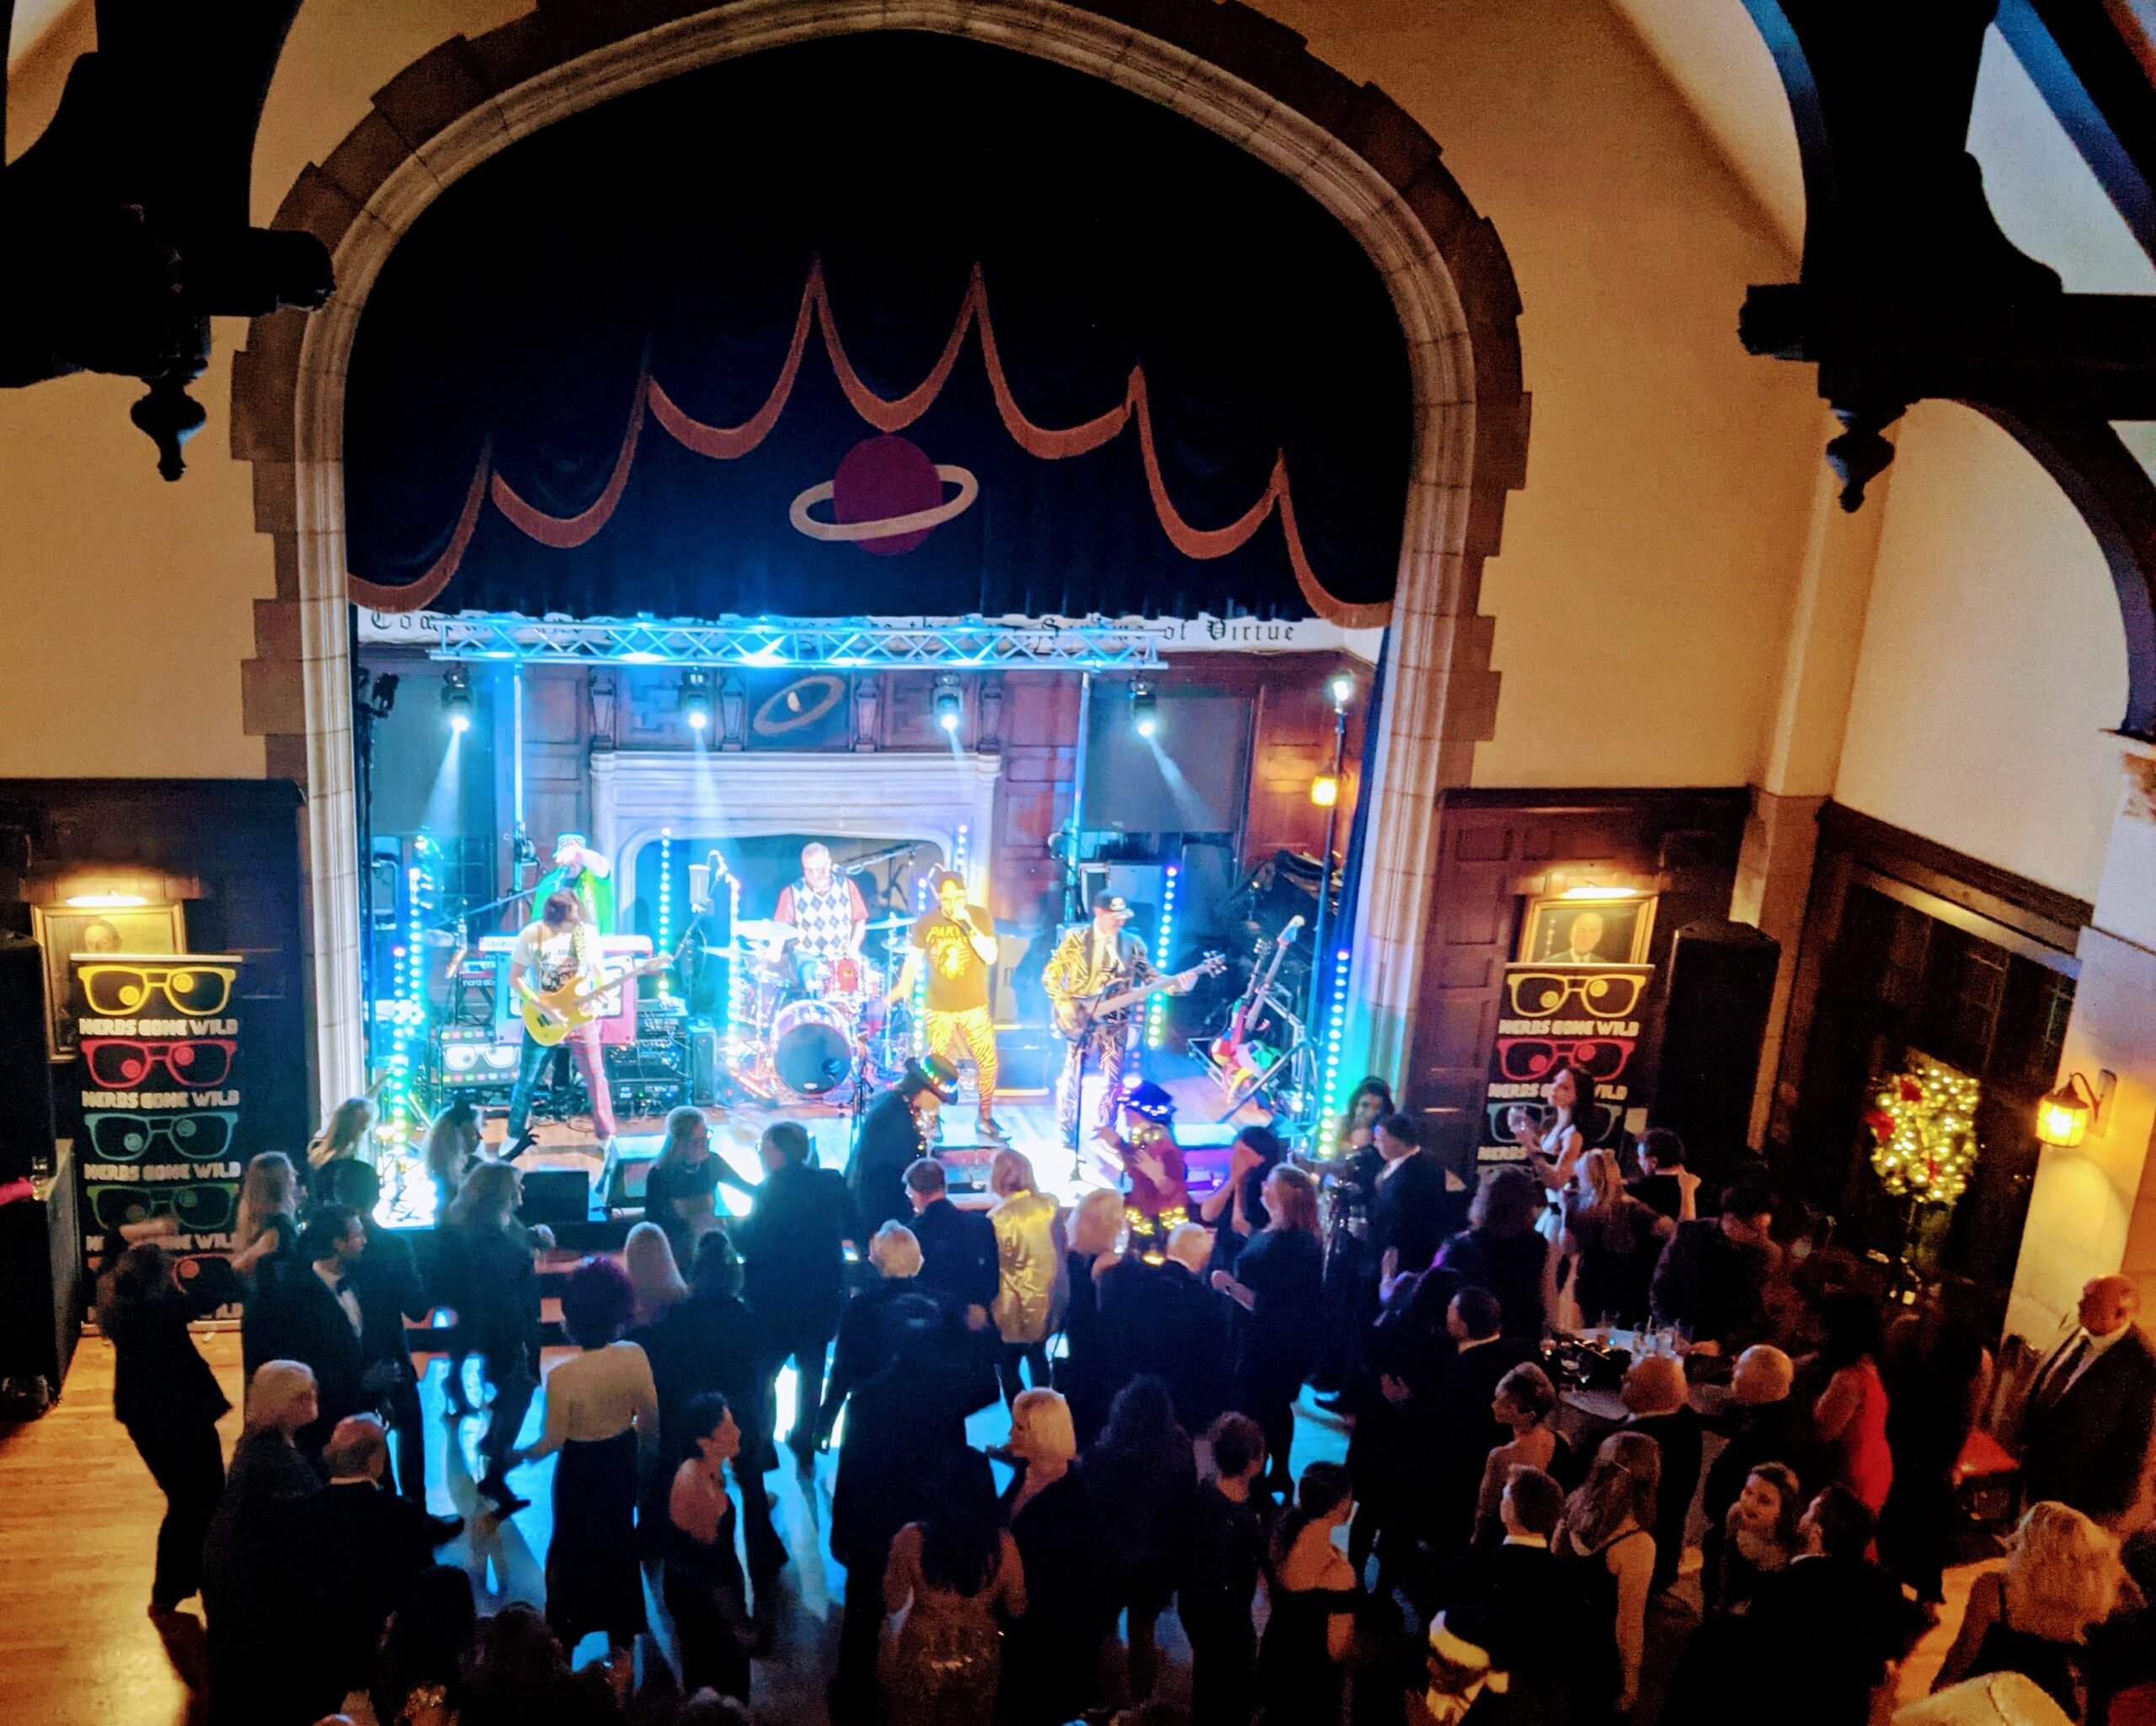 SitlerHQ lends production and management support to sold-out Kootsie Ball